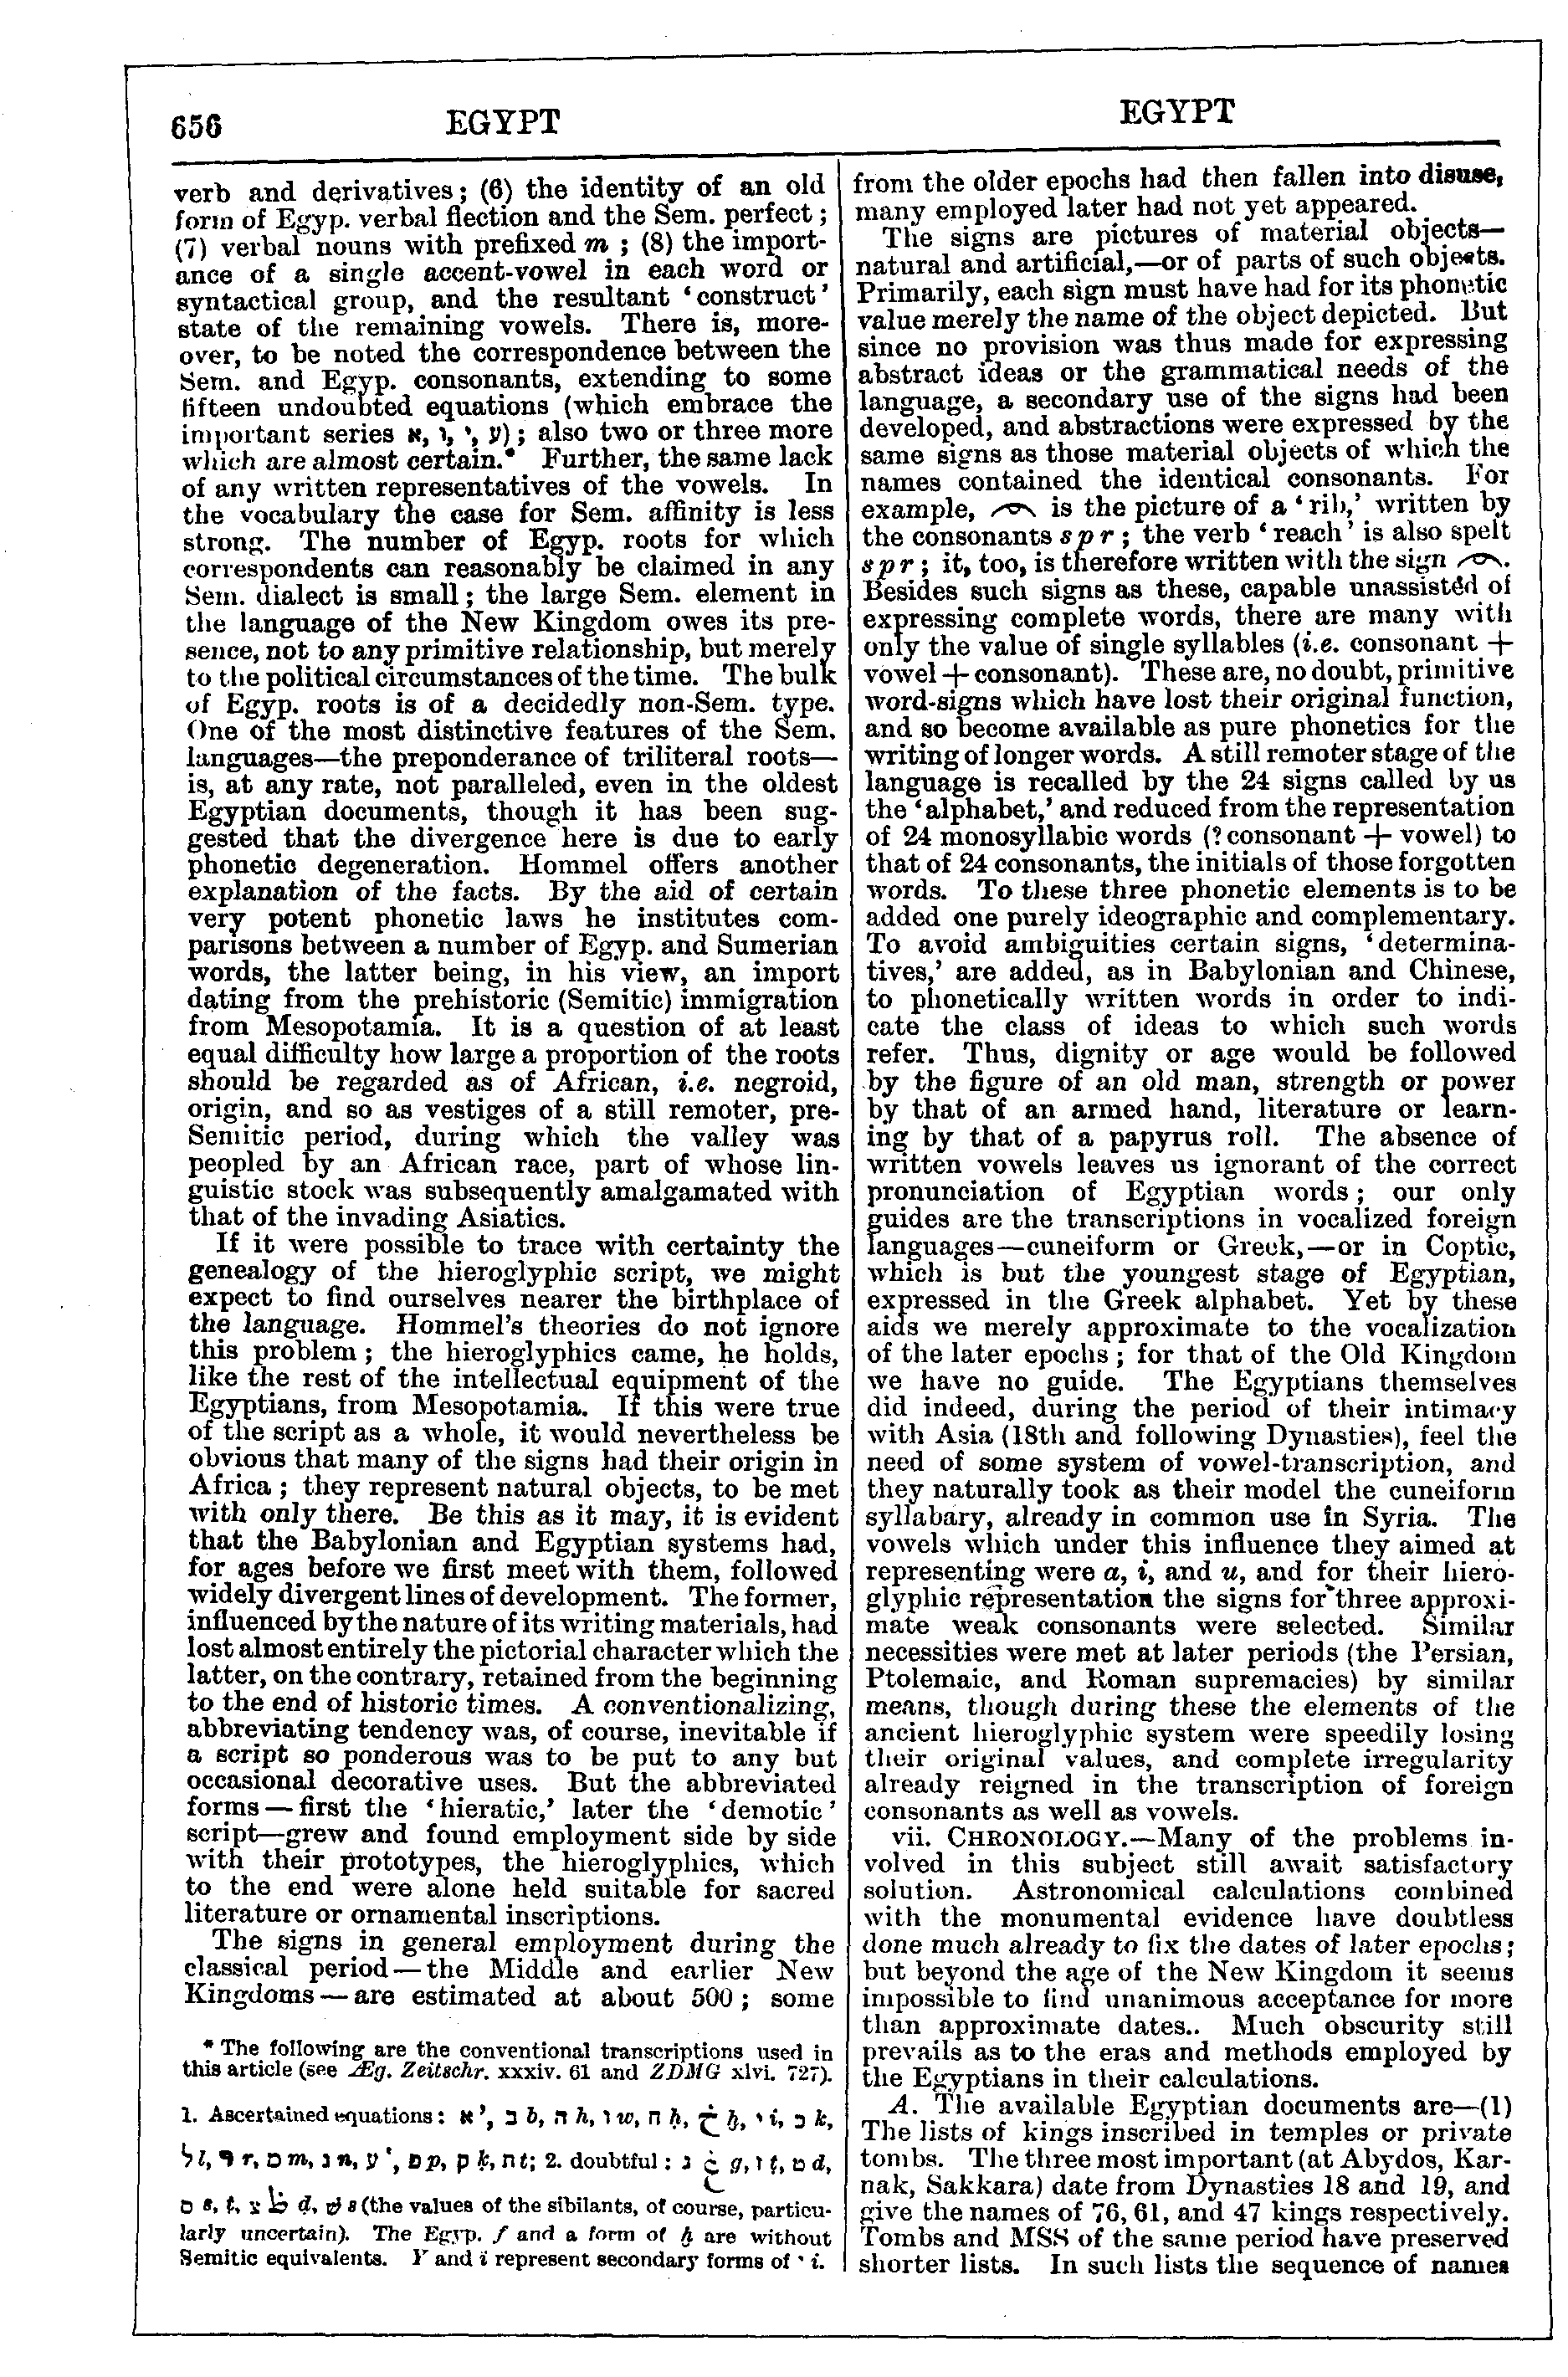 Image of page 656